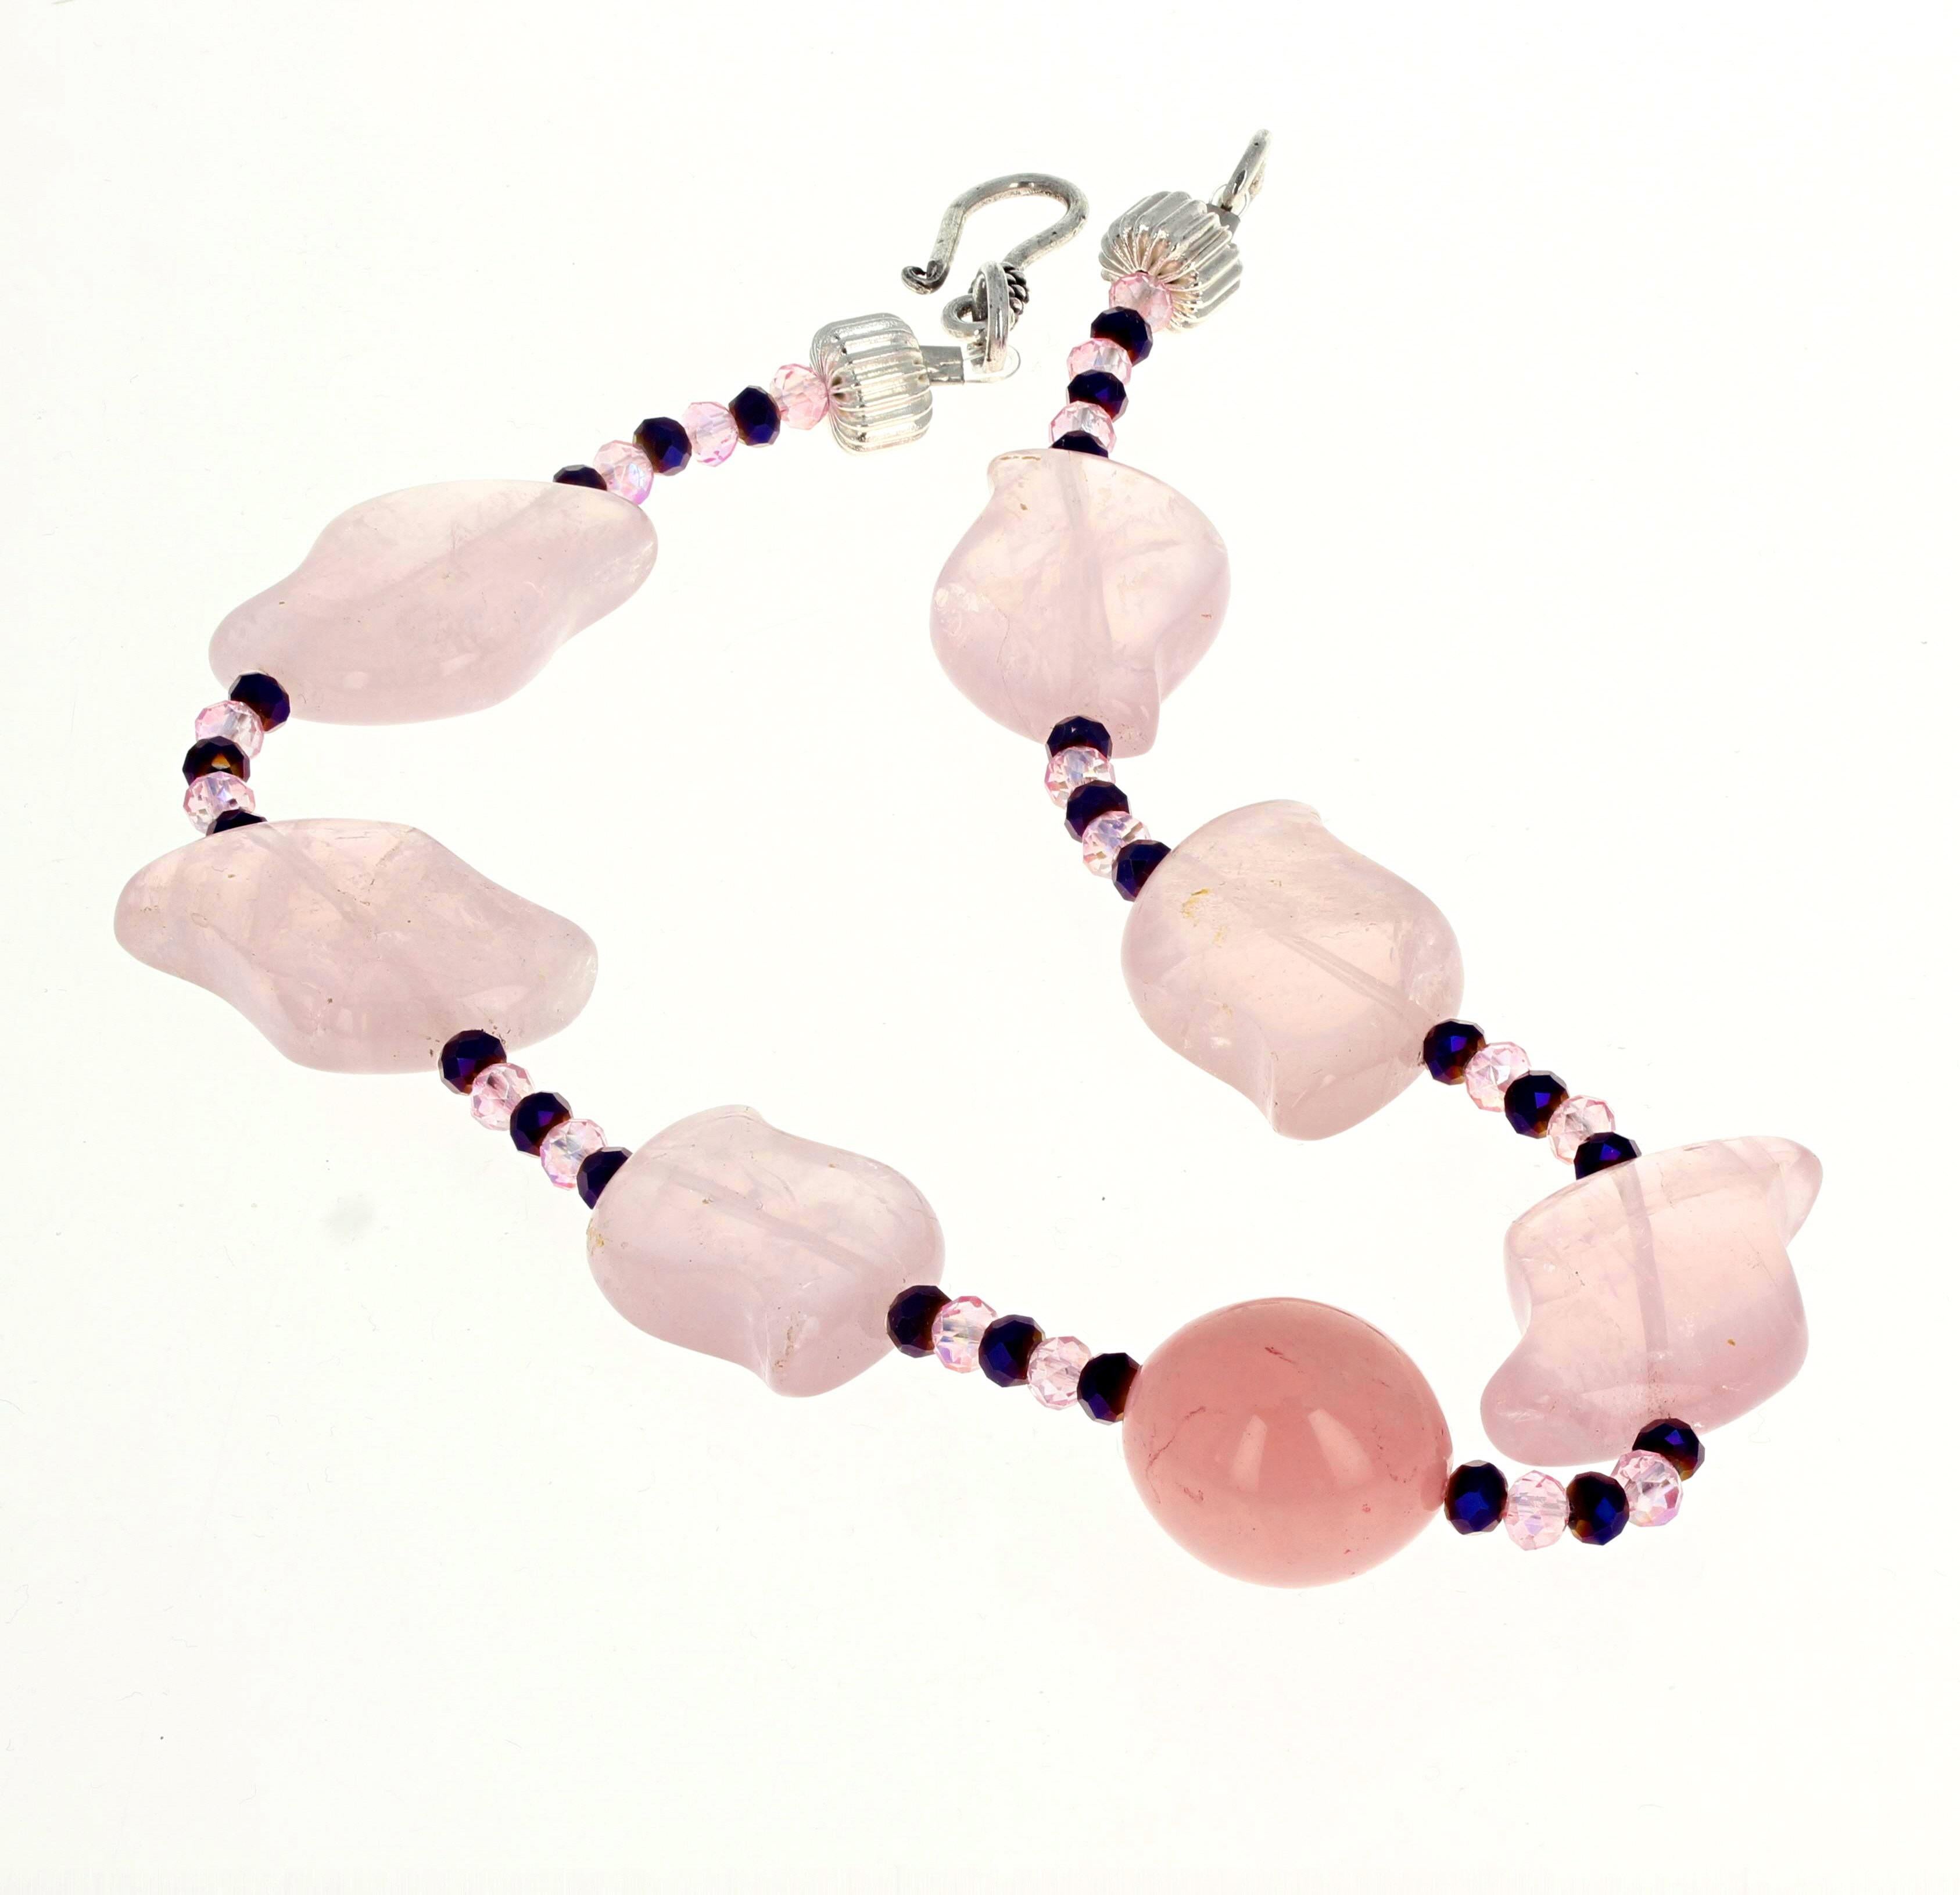 This lovely highly polished artistic pink Quartz (approximately 25mm x 18mm) is enhanced with gem cut sparkling little pink Quartz and natural real purple amethysts in this lovely  13 1/2 inch long necklace.  The clasp is a silver easy to use hook